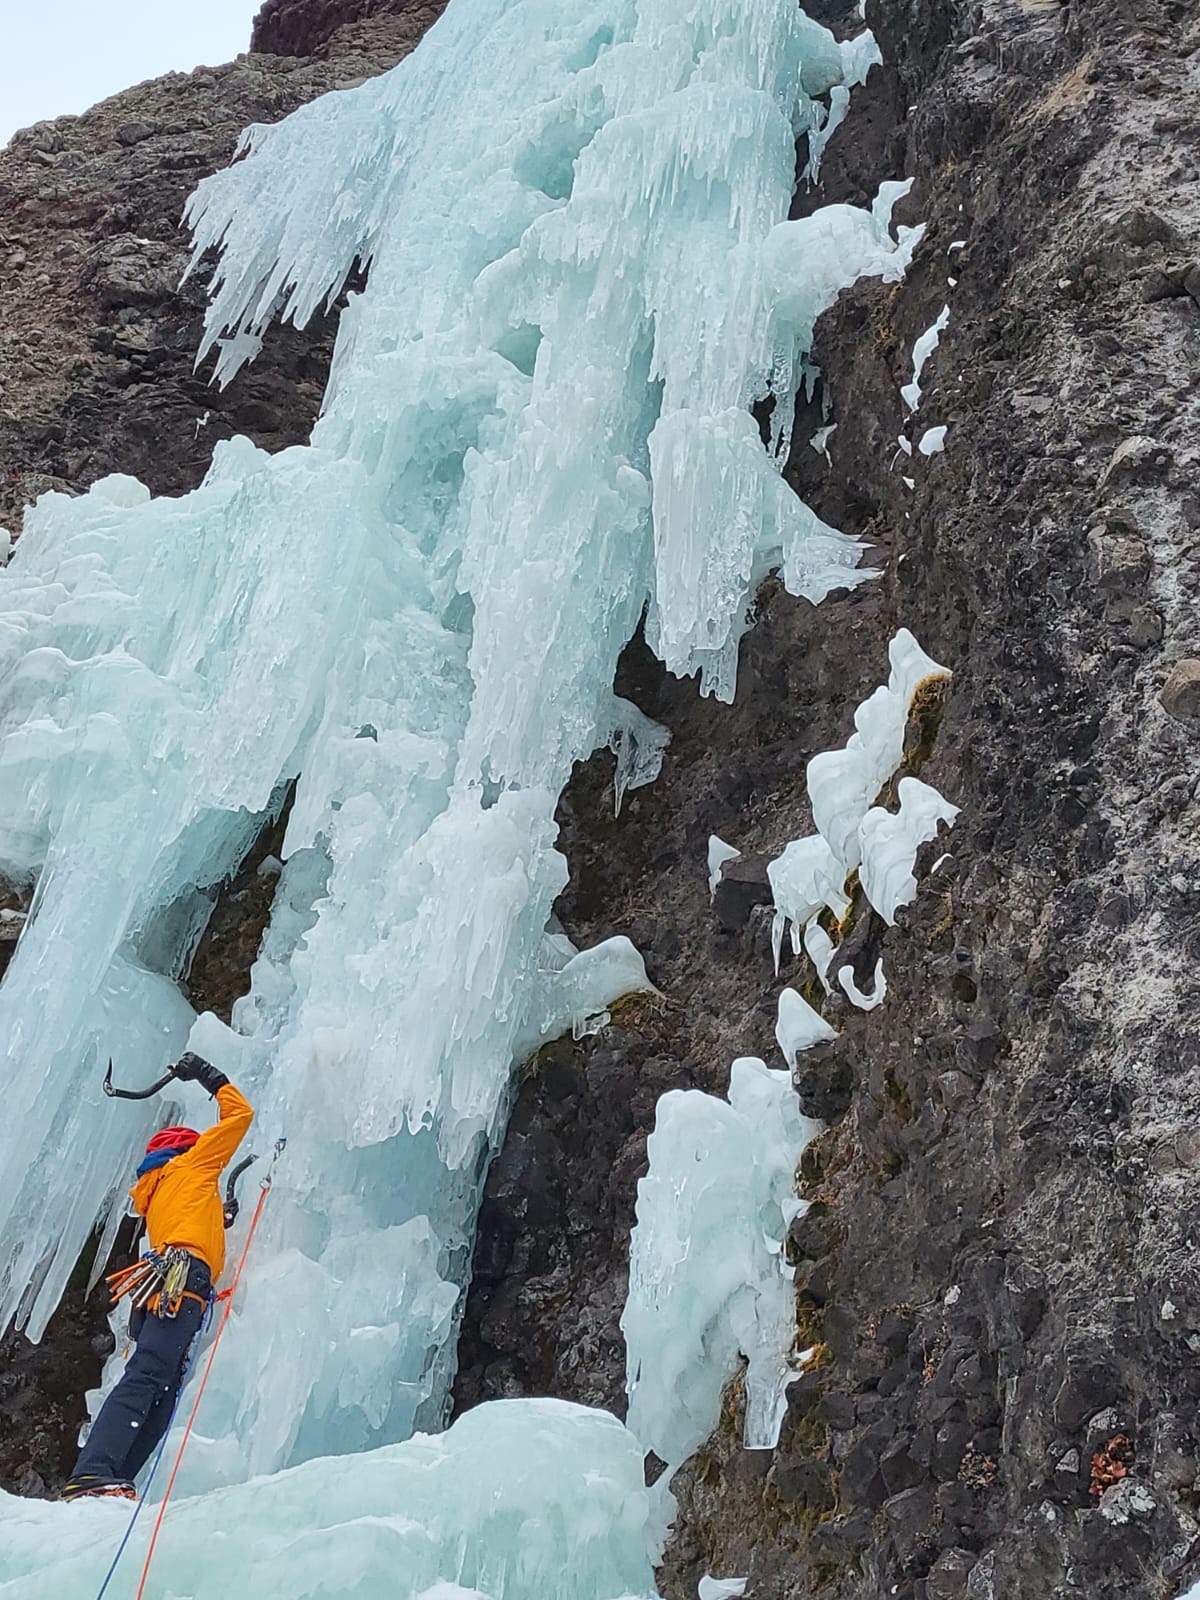 A man stands at the base of a steep pillar of ice, swinging his ice tool to begin the lead. he wears Showa Temres 282-02 Japanese Fishing Gloves, a bright orange jacket, navy blue pants, and a red helmet. An ice screw is placed at his eye level and the rope is attached to provide fall protection as he begins the climb.